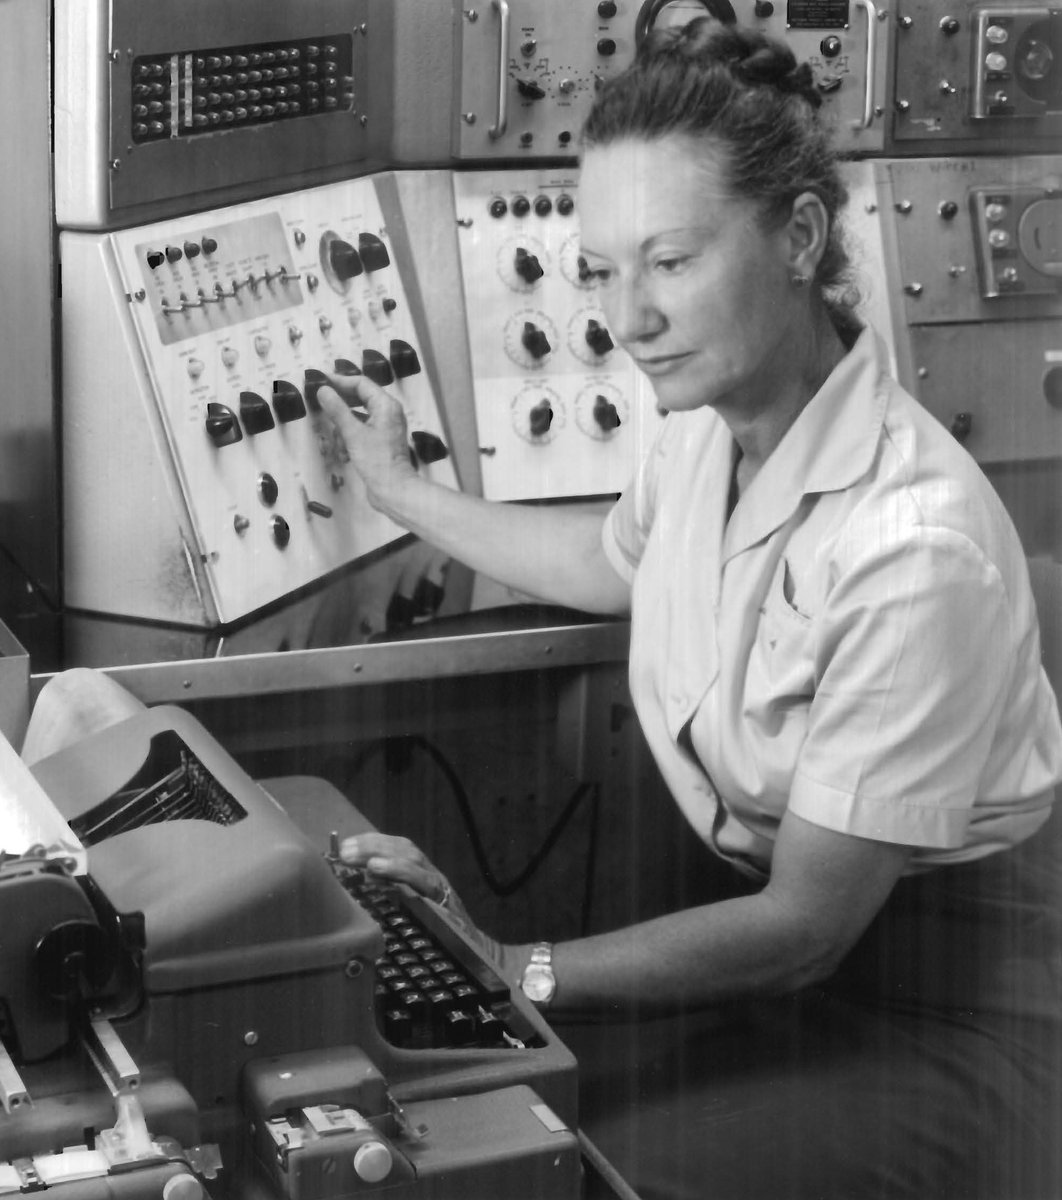 CBI Image o' Day. Computer programmer Ethel Marden, National Bureau of Standards operates the Standards Electronic Automatic Computer (SEAC) during the 1950s. Credit: NIST. #EthelMarden #Womenprogrammers #WomeninIT #SEAC #NationalBureauofStandards #VonNeumannArchitecture